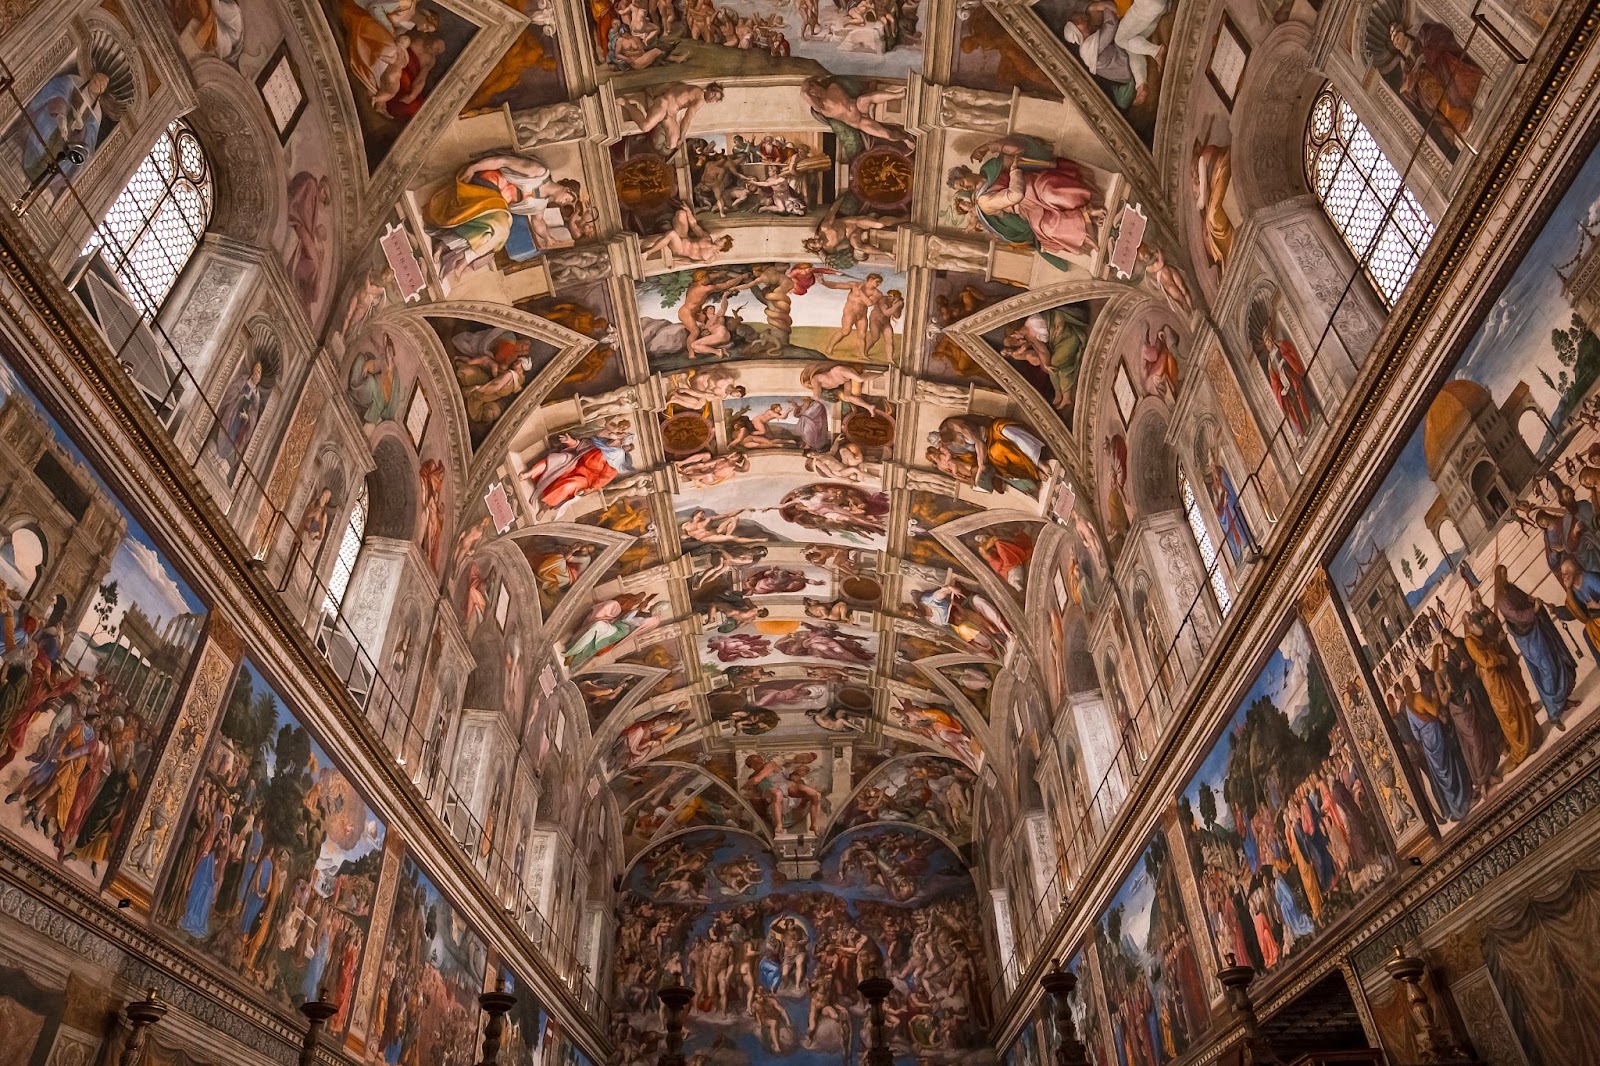 The Sistine Chapel, Italy - 23 Top Sights to See Before You Die